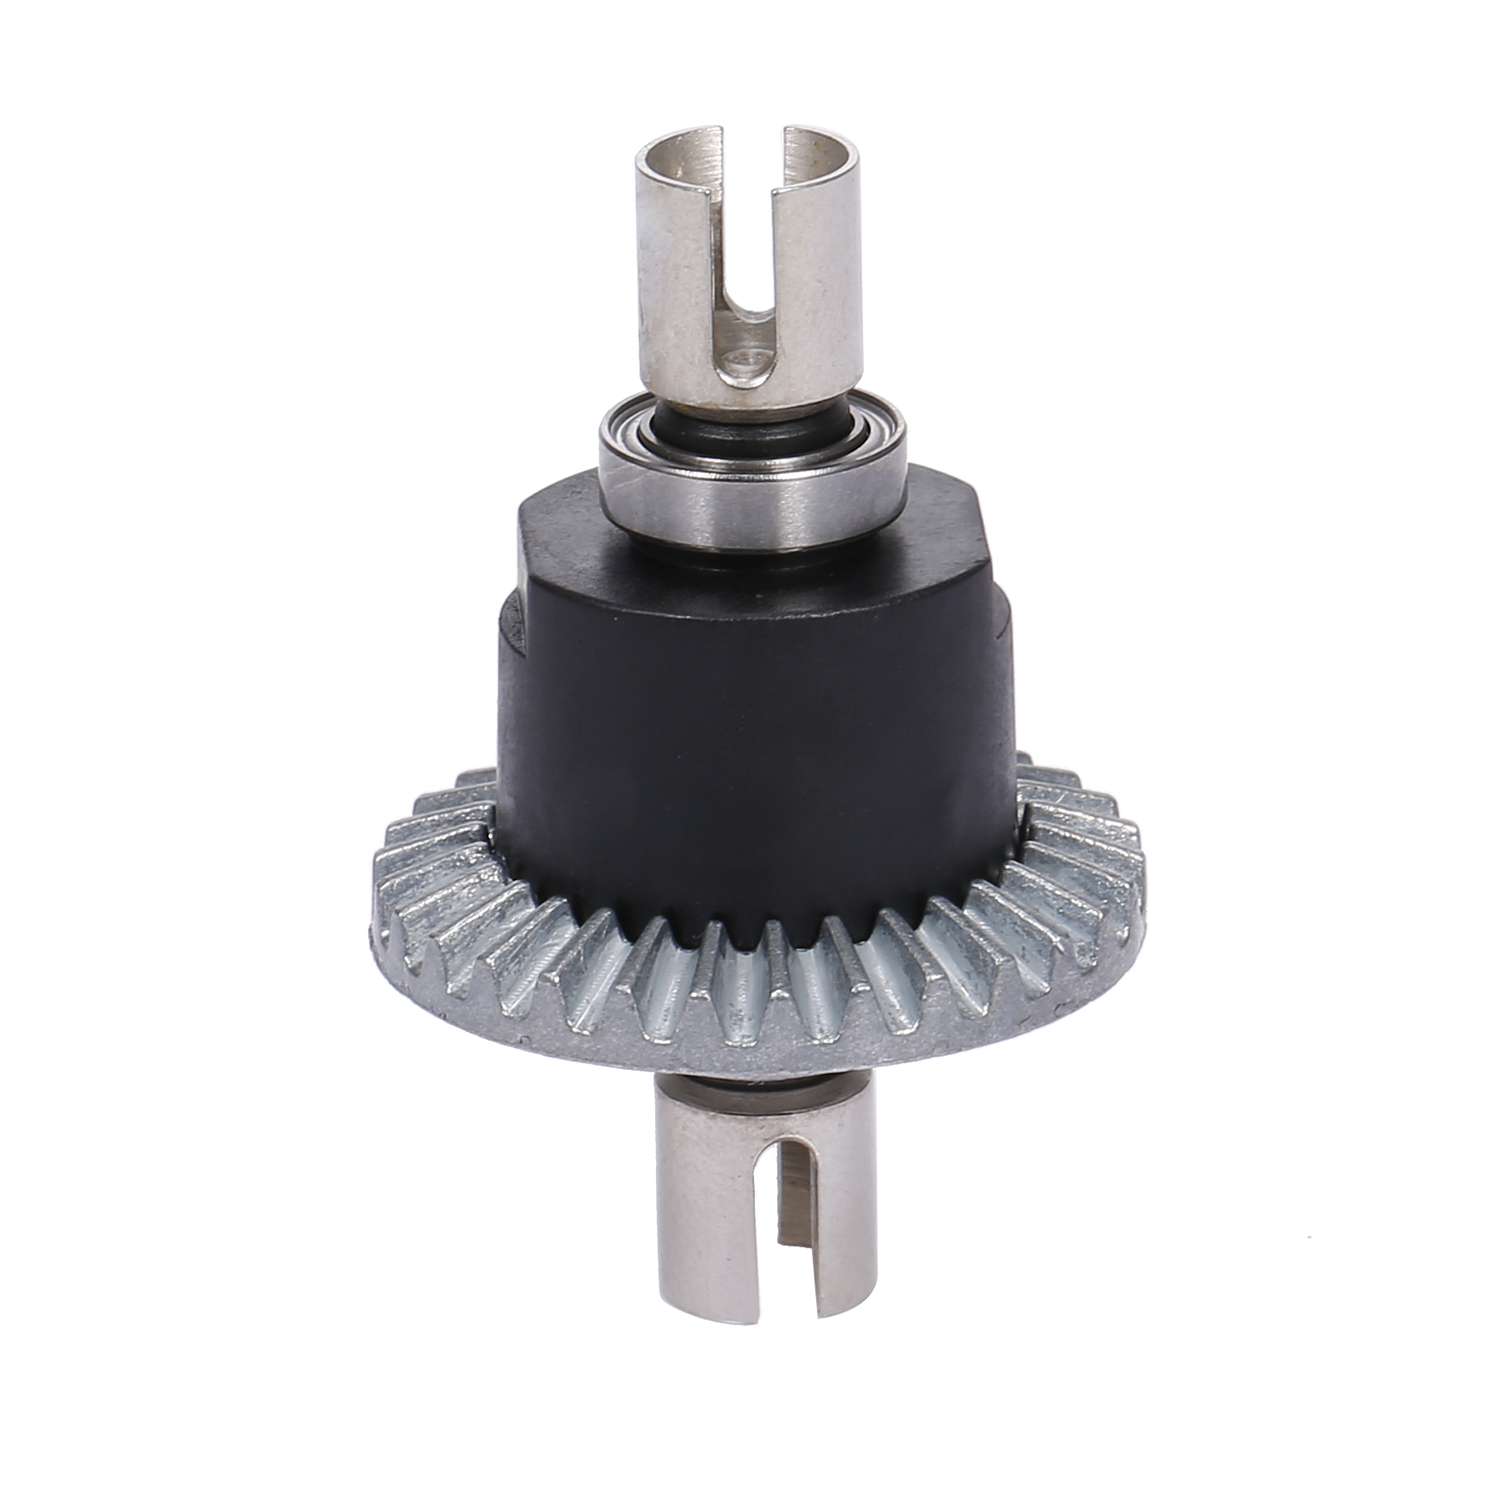 WLtoys Metal Differential for Wltoys XK 144001 RC Car Replacement Part Differential Gear for Wltoys XK 144001 114 2.4GHz RC - image 4 of 7